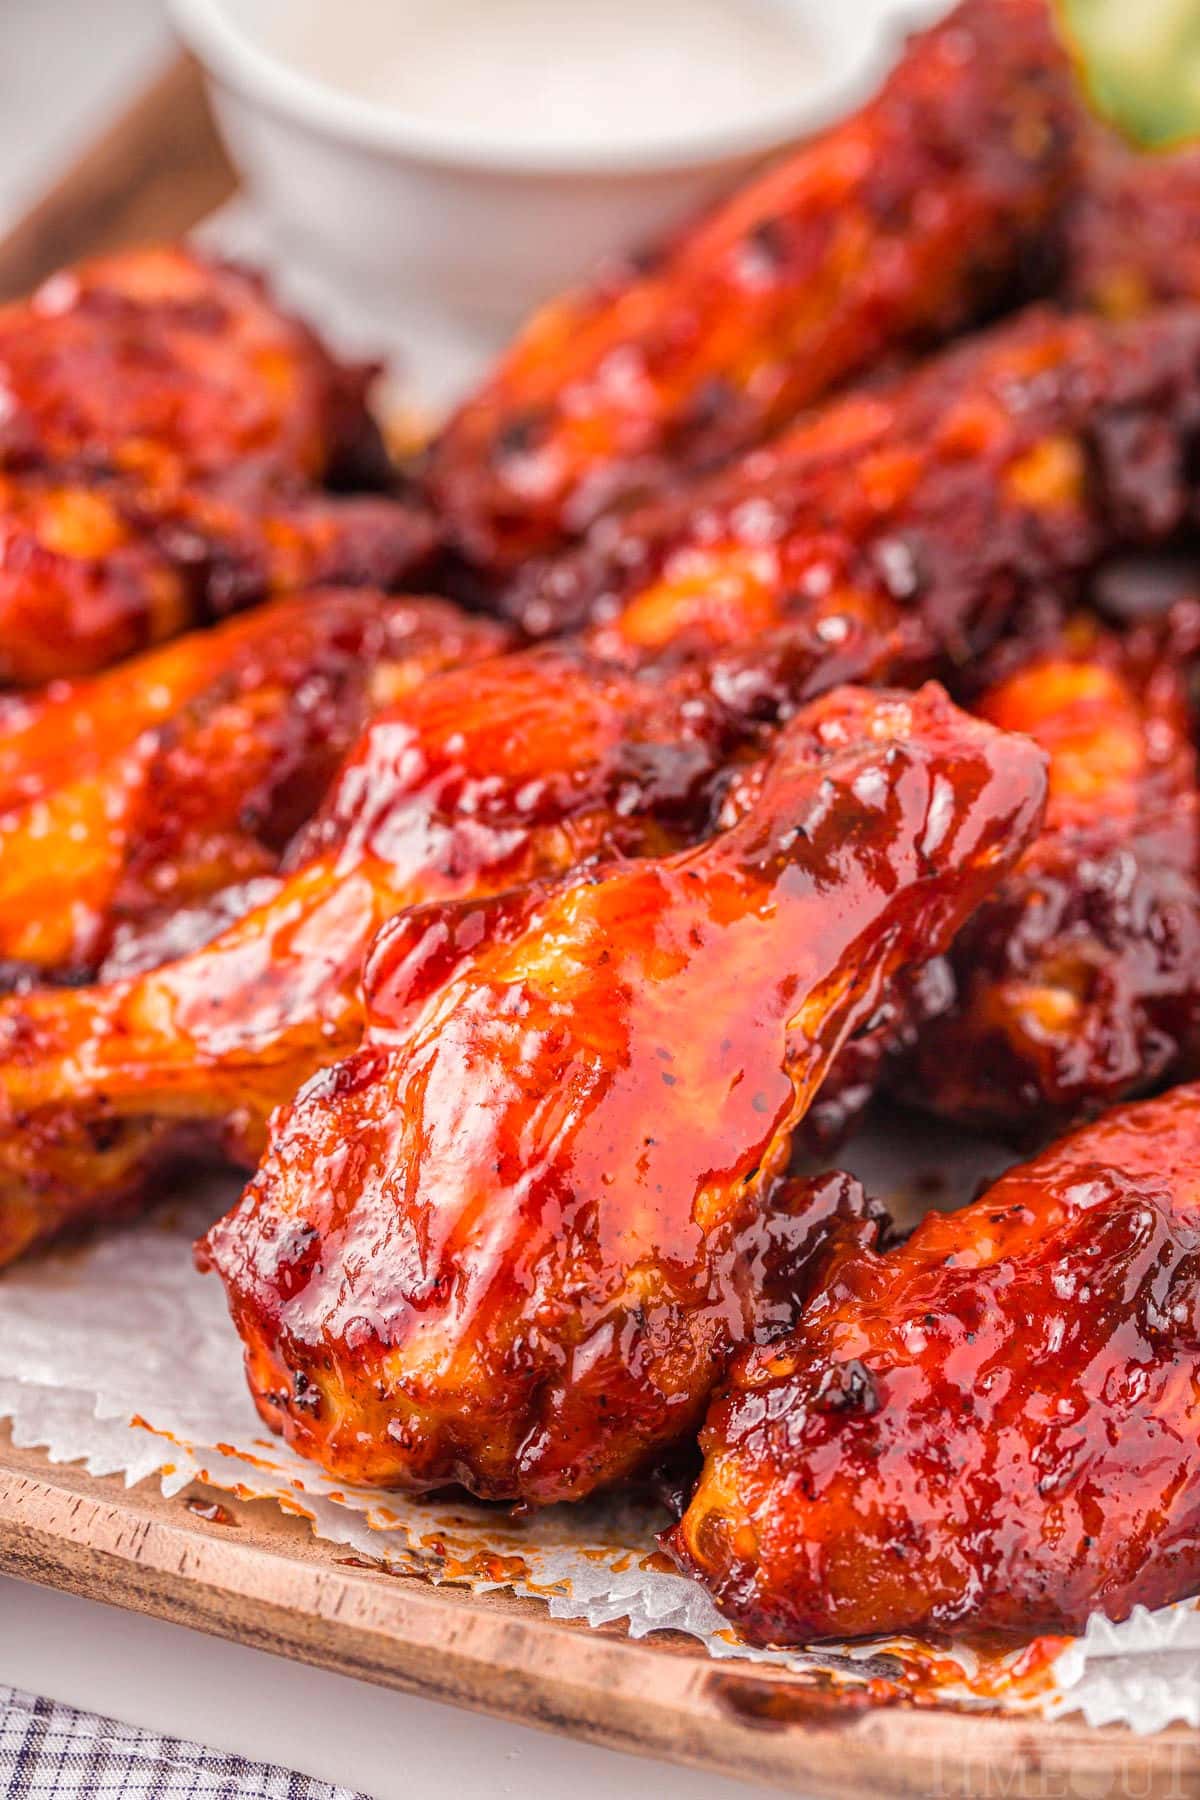 chicken wings made in the air fryer are brushed with bbq sauce and ready to serve on a wooden board.